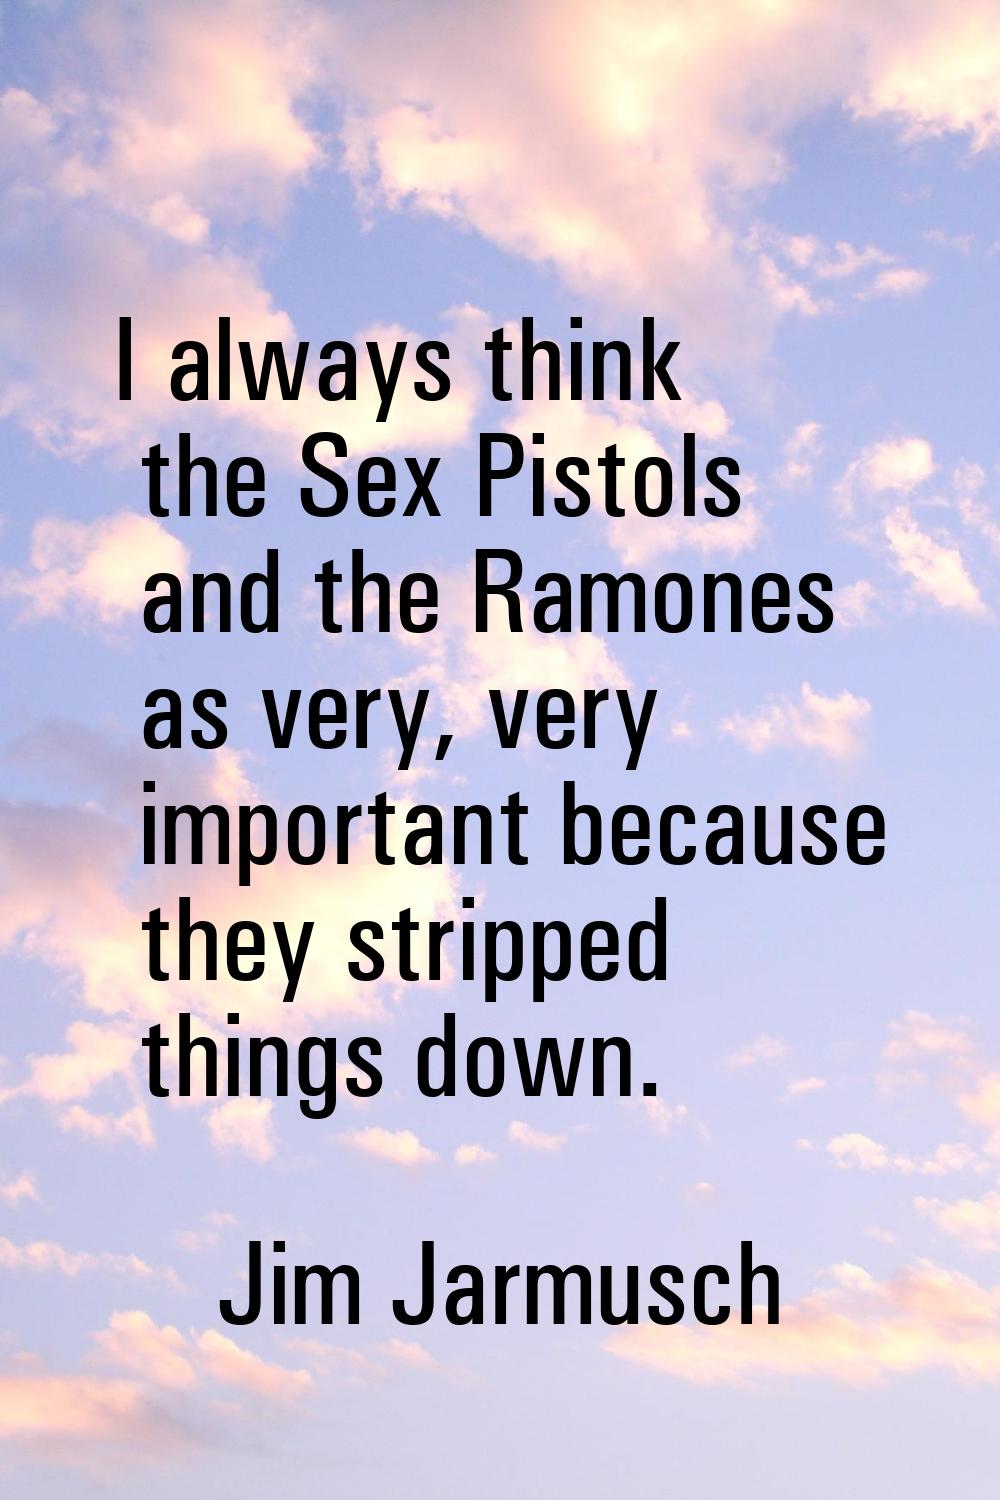 I always think the Sex Pistols and the Ramones as very, very important because they stripped things